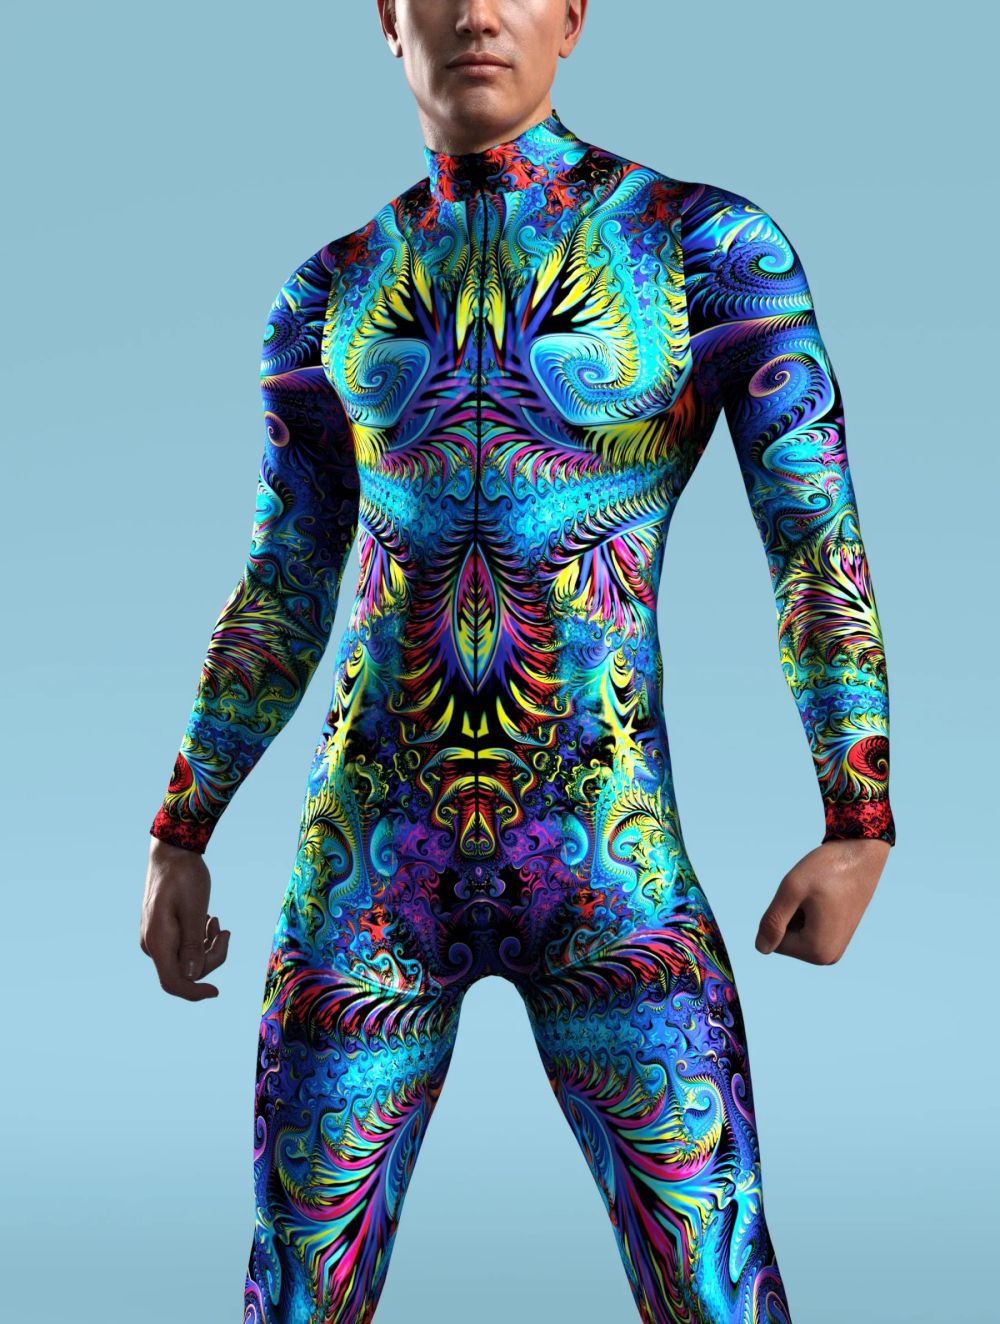 A person wears a vividly colored, intricately patterned Maramalive™ 3D Digital Printed Cosplay One-piece Costume with long sleeves against a plain blue background, embodying the European and American style often seen in game animation role playing.